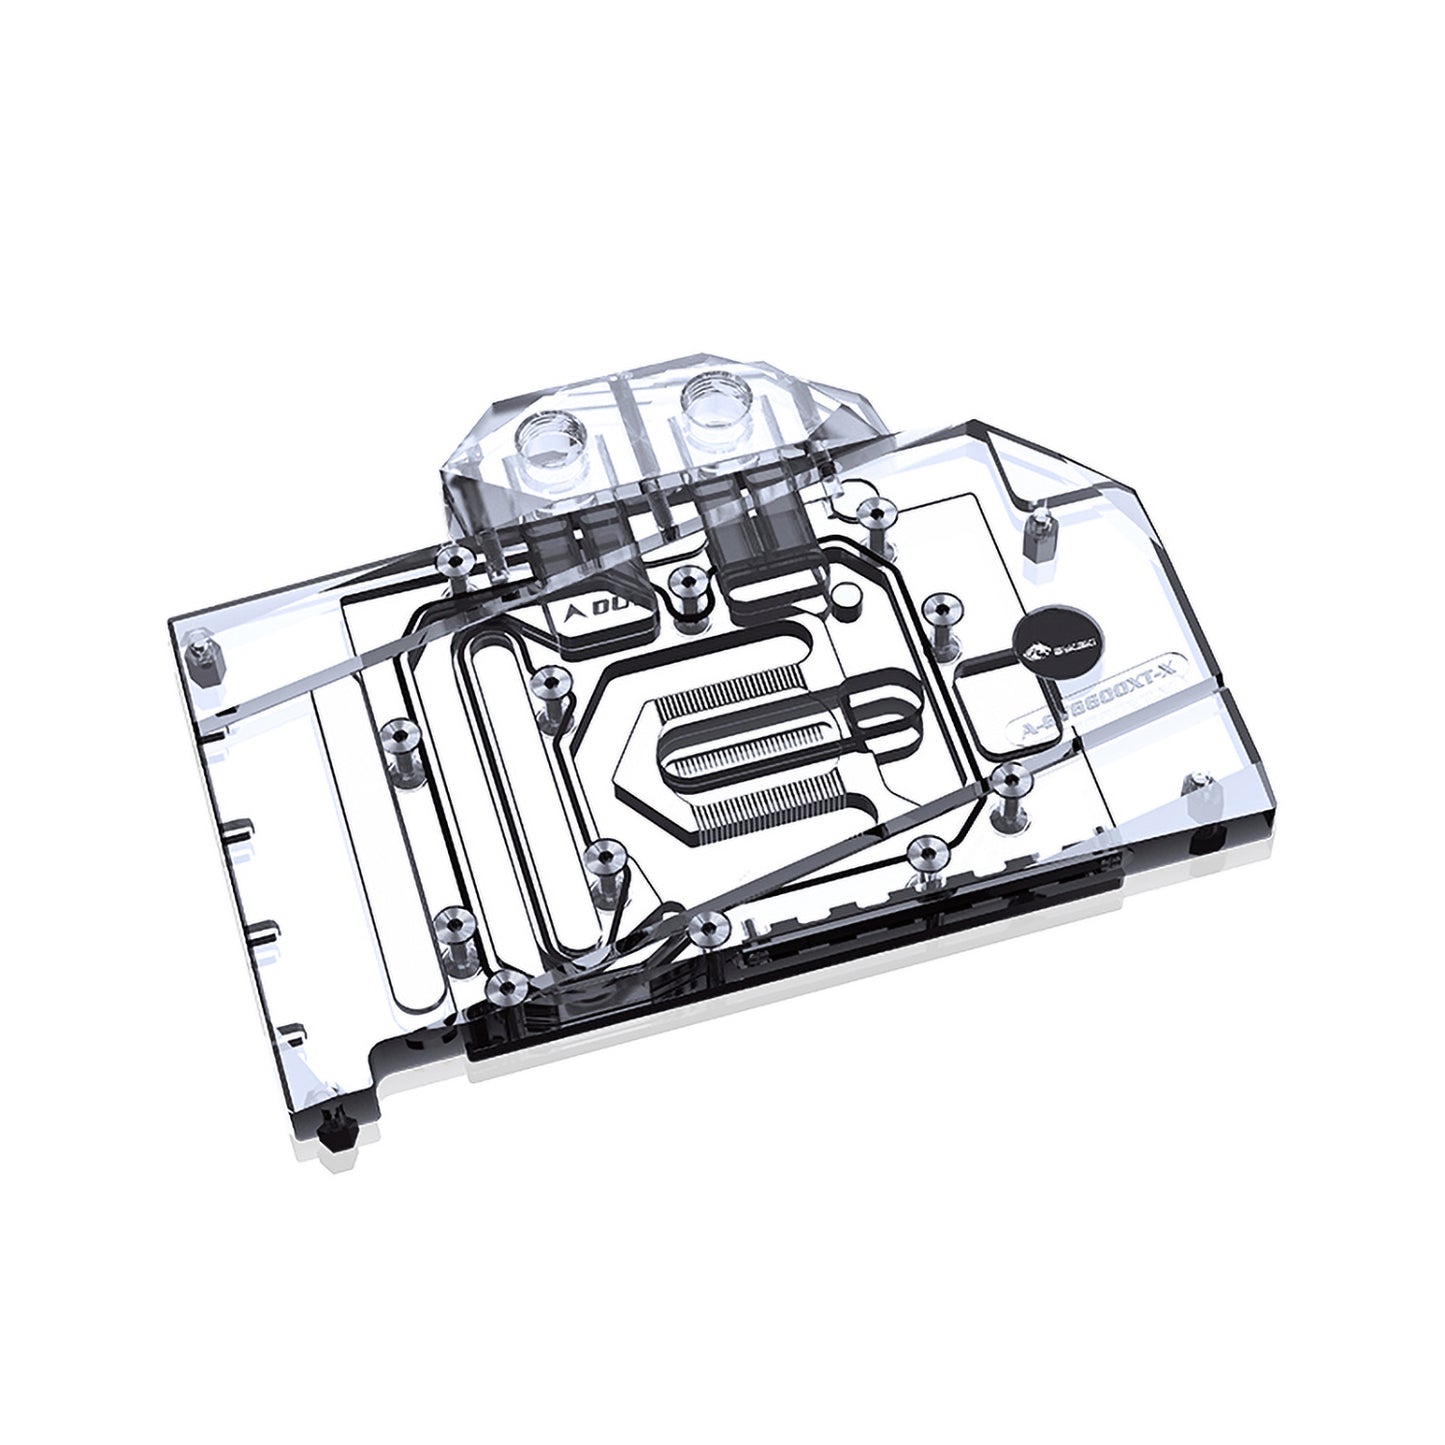 Bykski GPU Water Block For Gigabyte RX 6600 XT Eagle, Full Cover With Backplate PC Water Cooling Cooler, A-GV6600XT-X